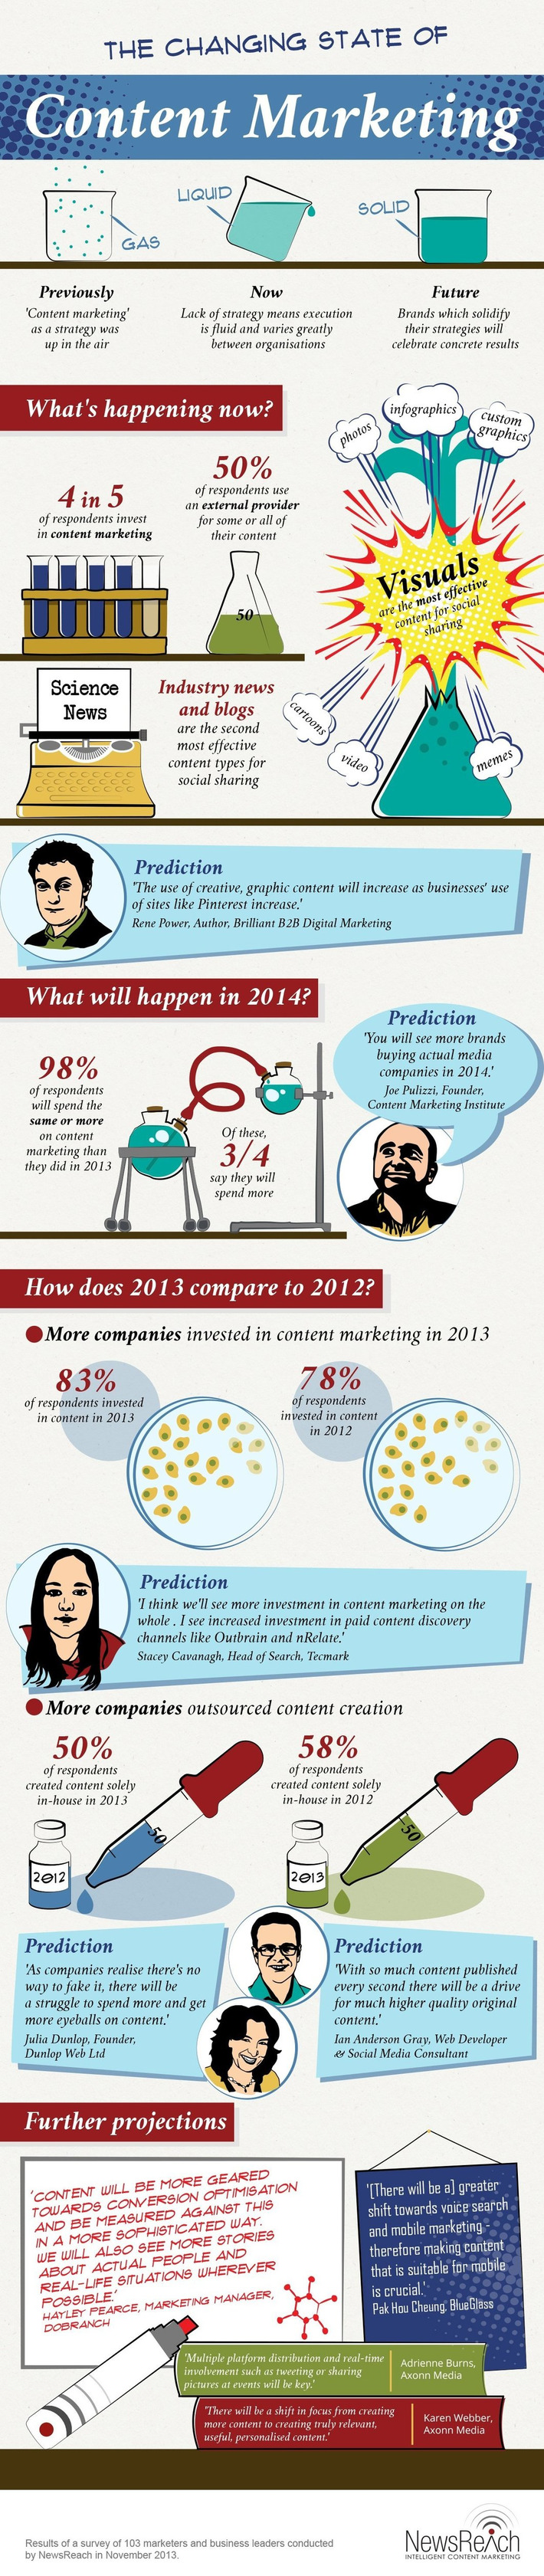 The Changing State of Content Marketing [INFOGRAPHIC] | #SeriouslySocial | The Social Media Times | Scoop.it